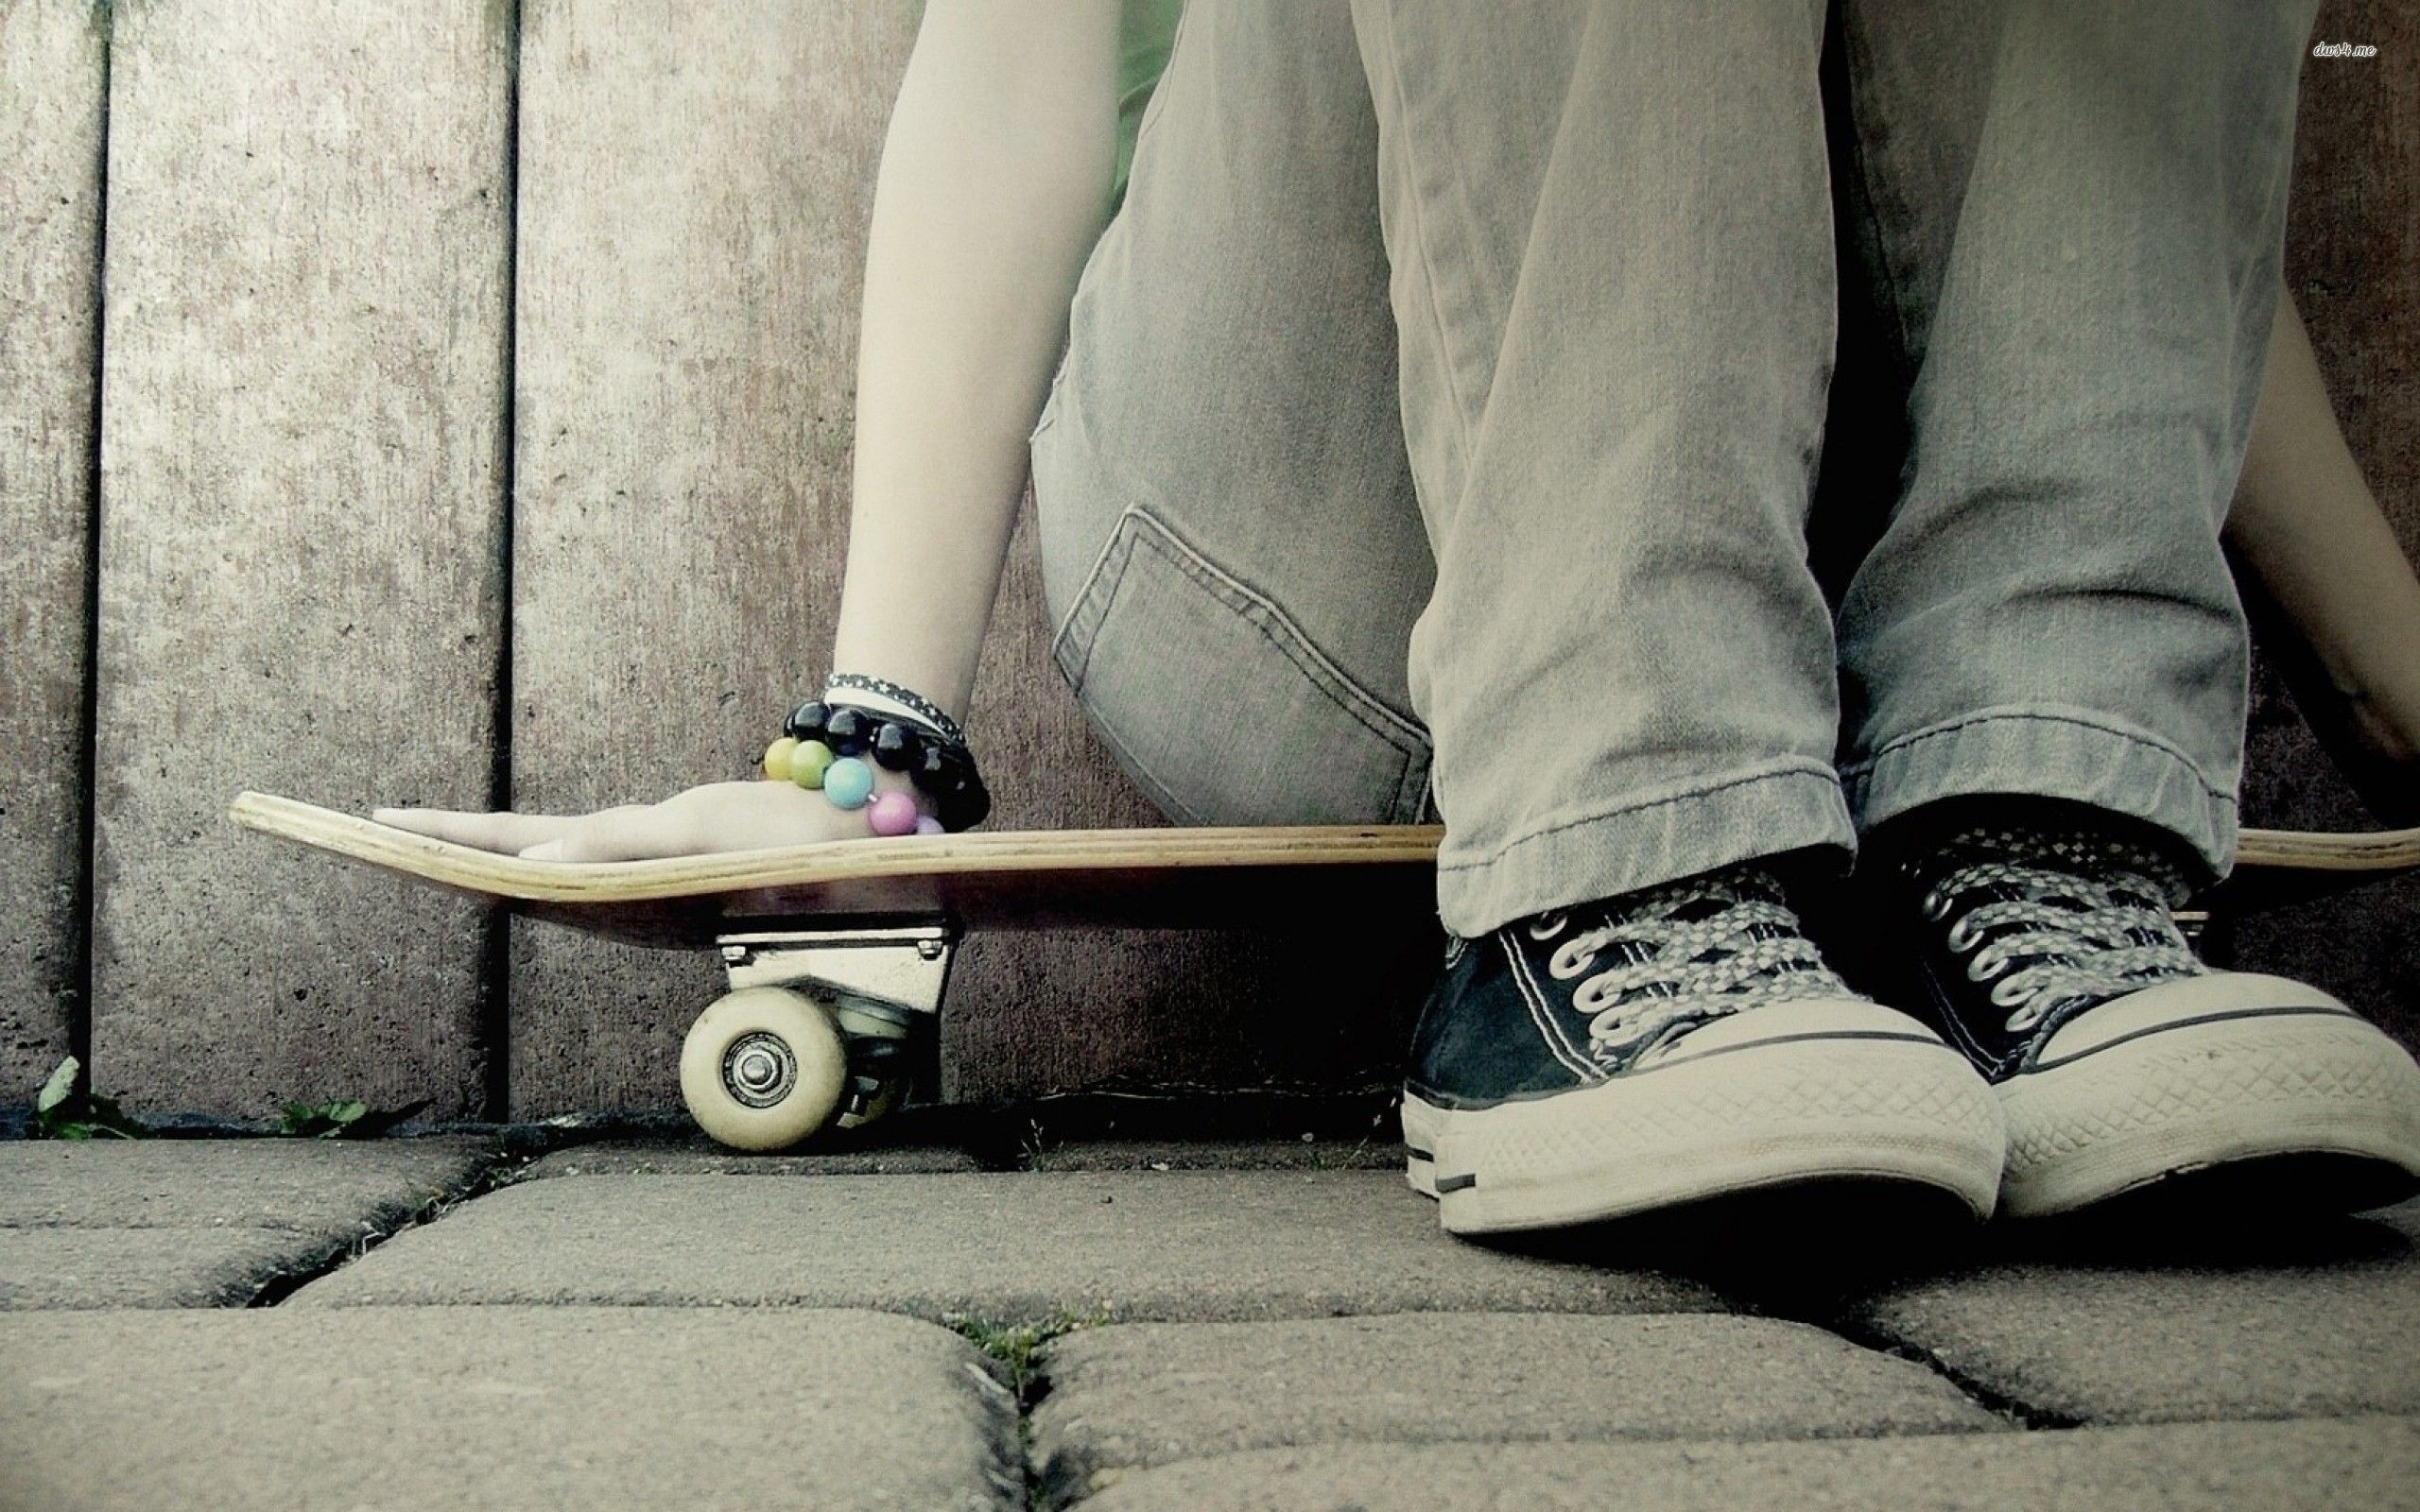 Sitting on a skateboard wallpaper - Photography wallpapers -